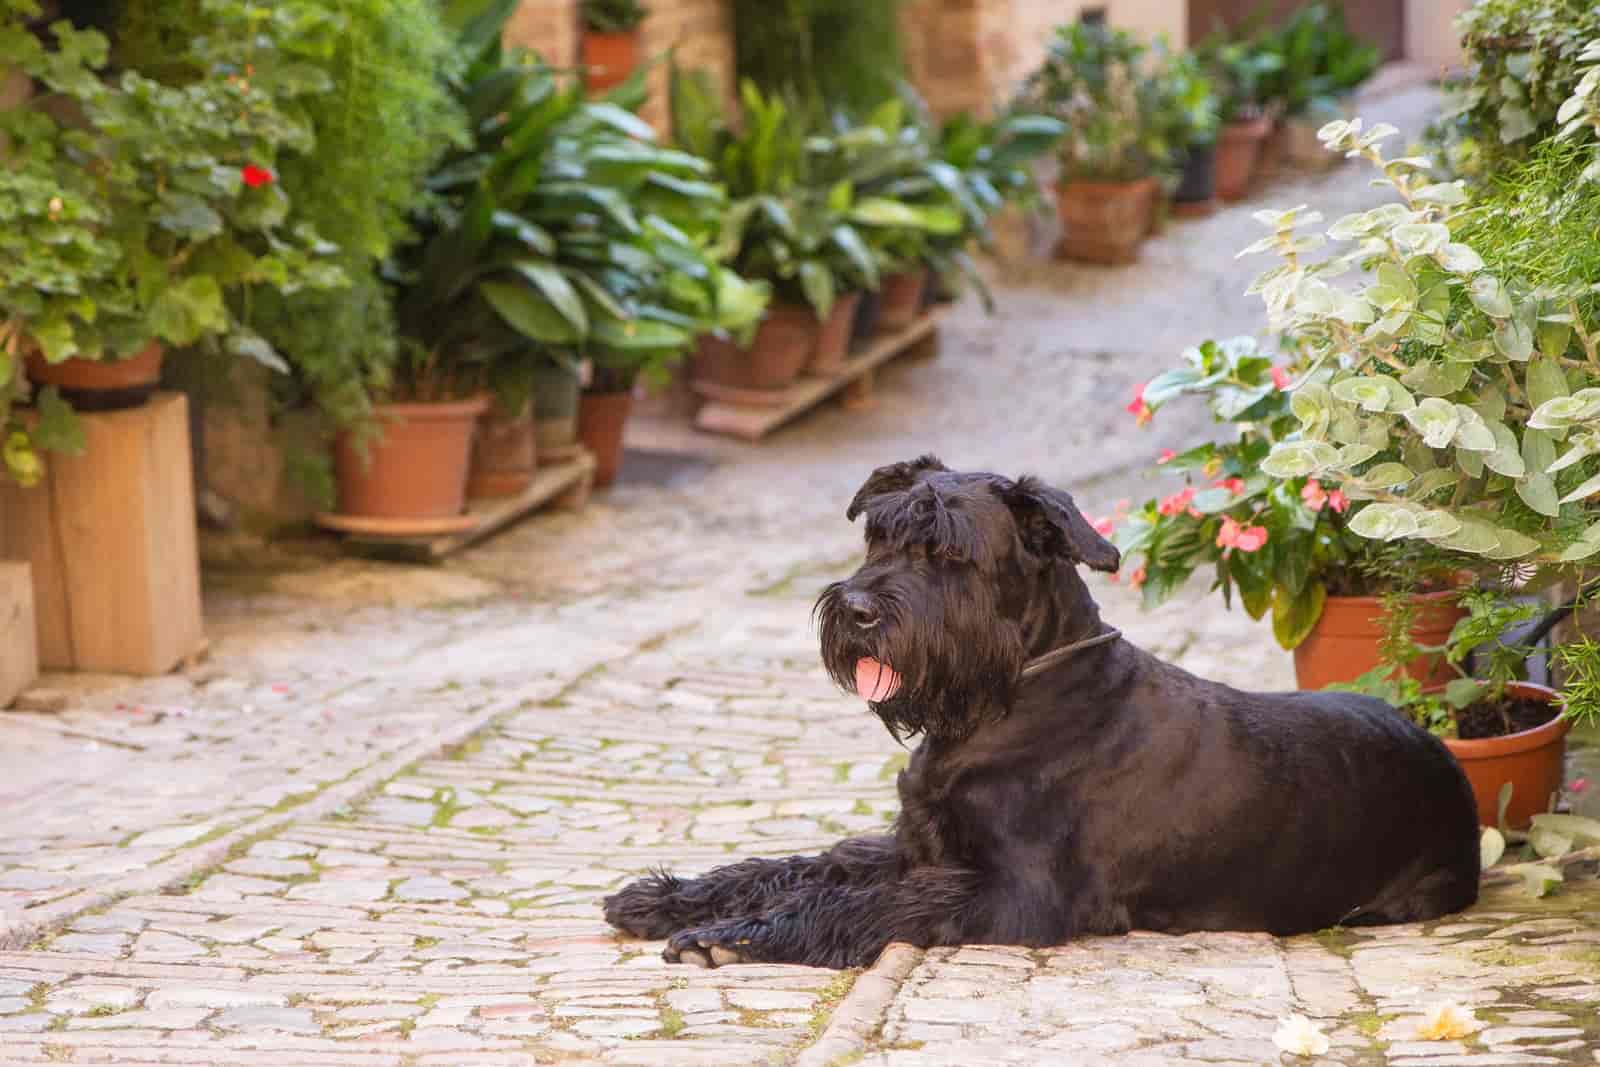 What Plants Are Most Poisonous To Dogs?